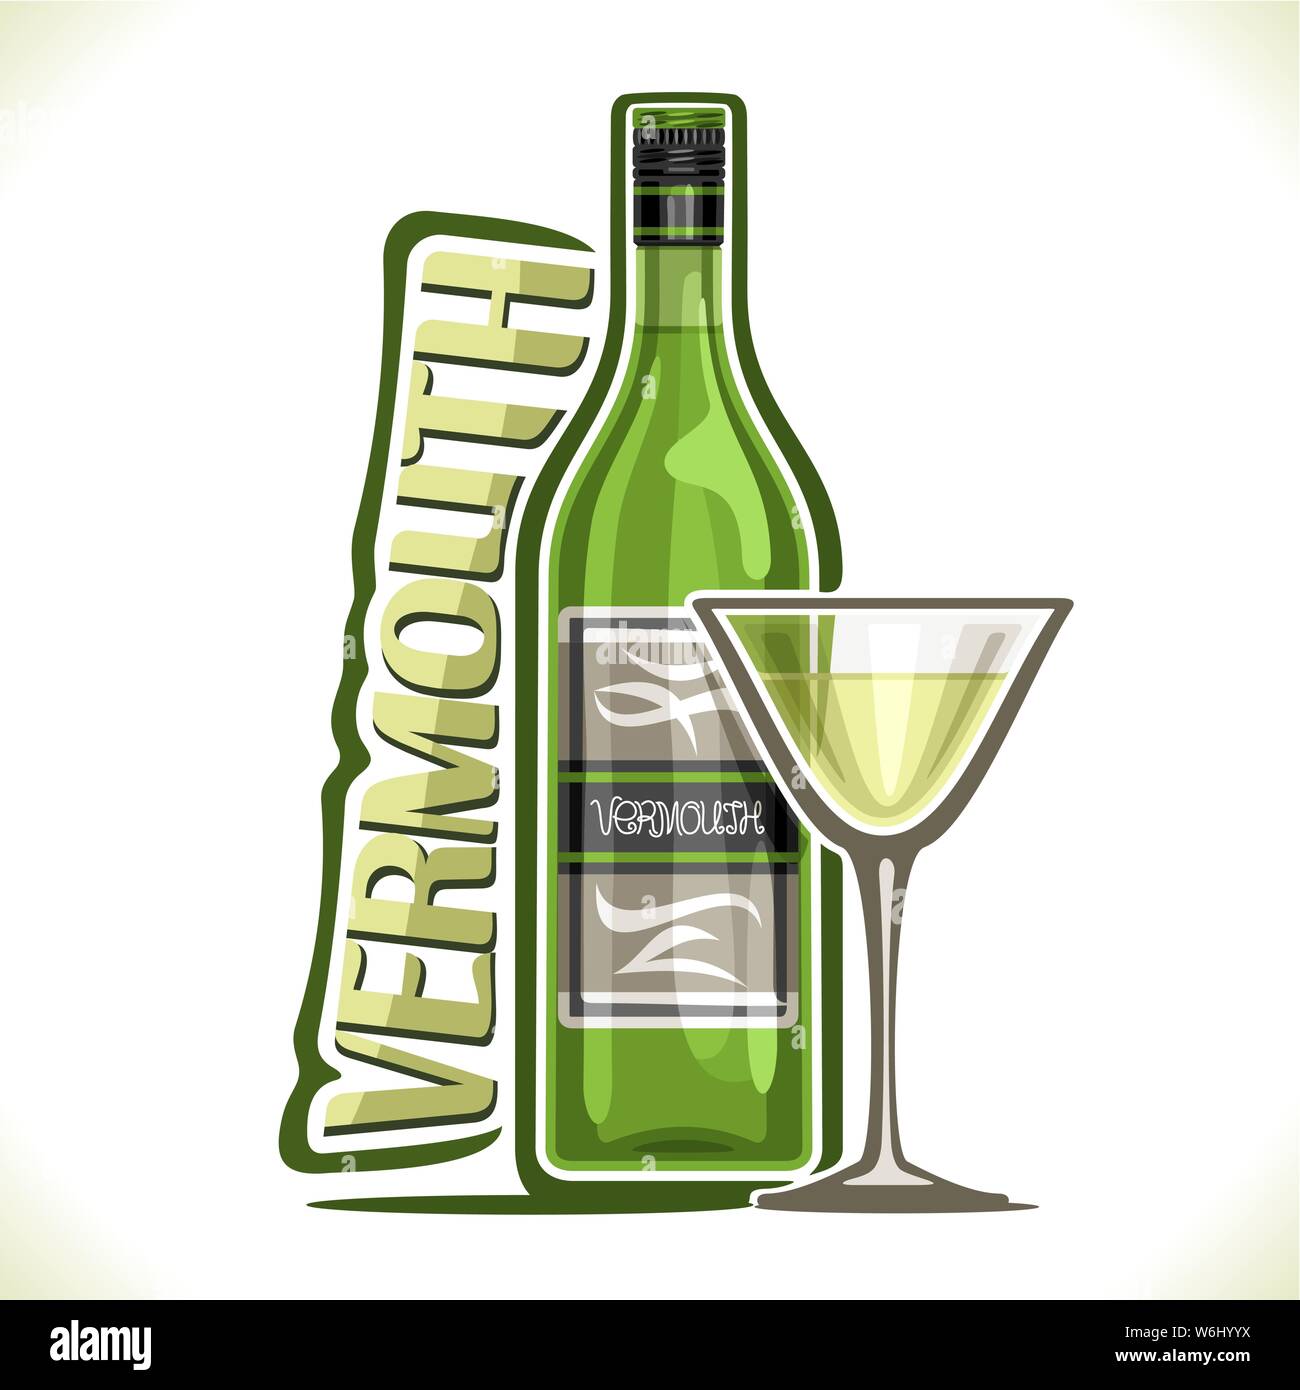 Bottle of Martini Bianco Vermouth Editorial Image - Image of alcohol,  beverage: 85201105